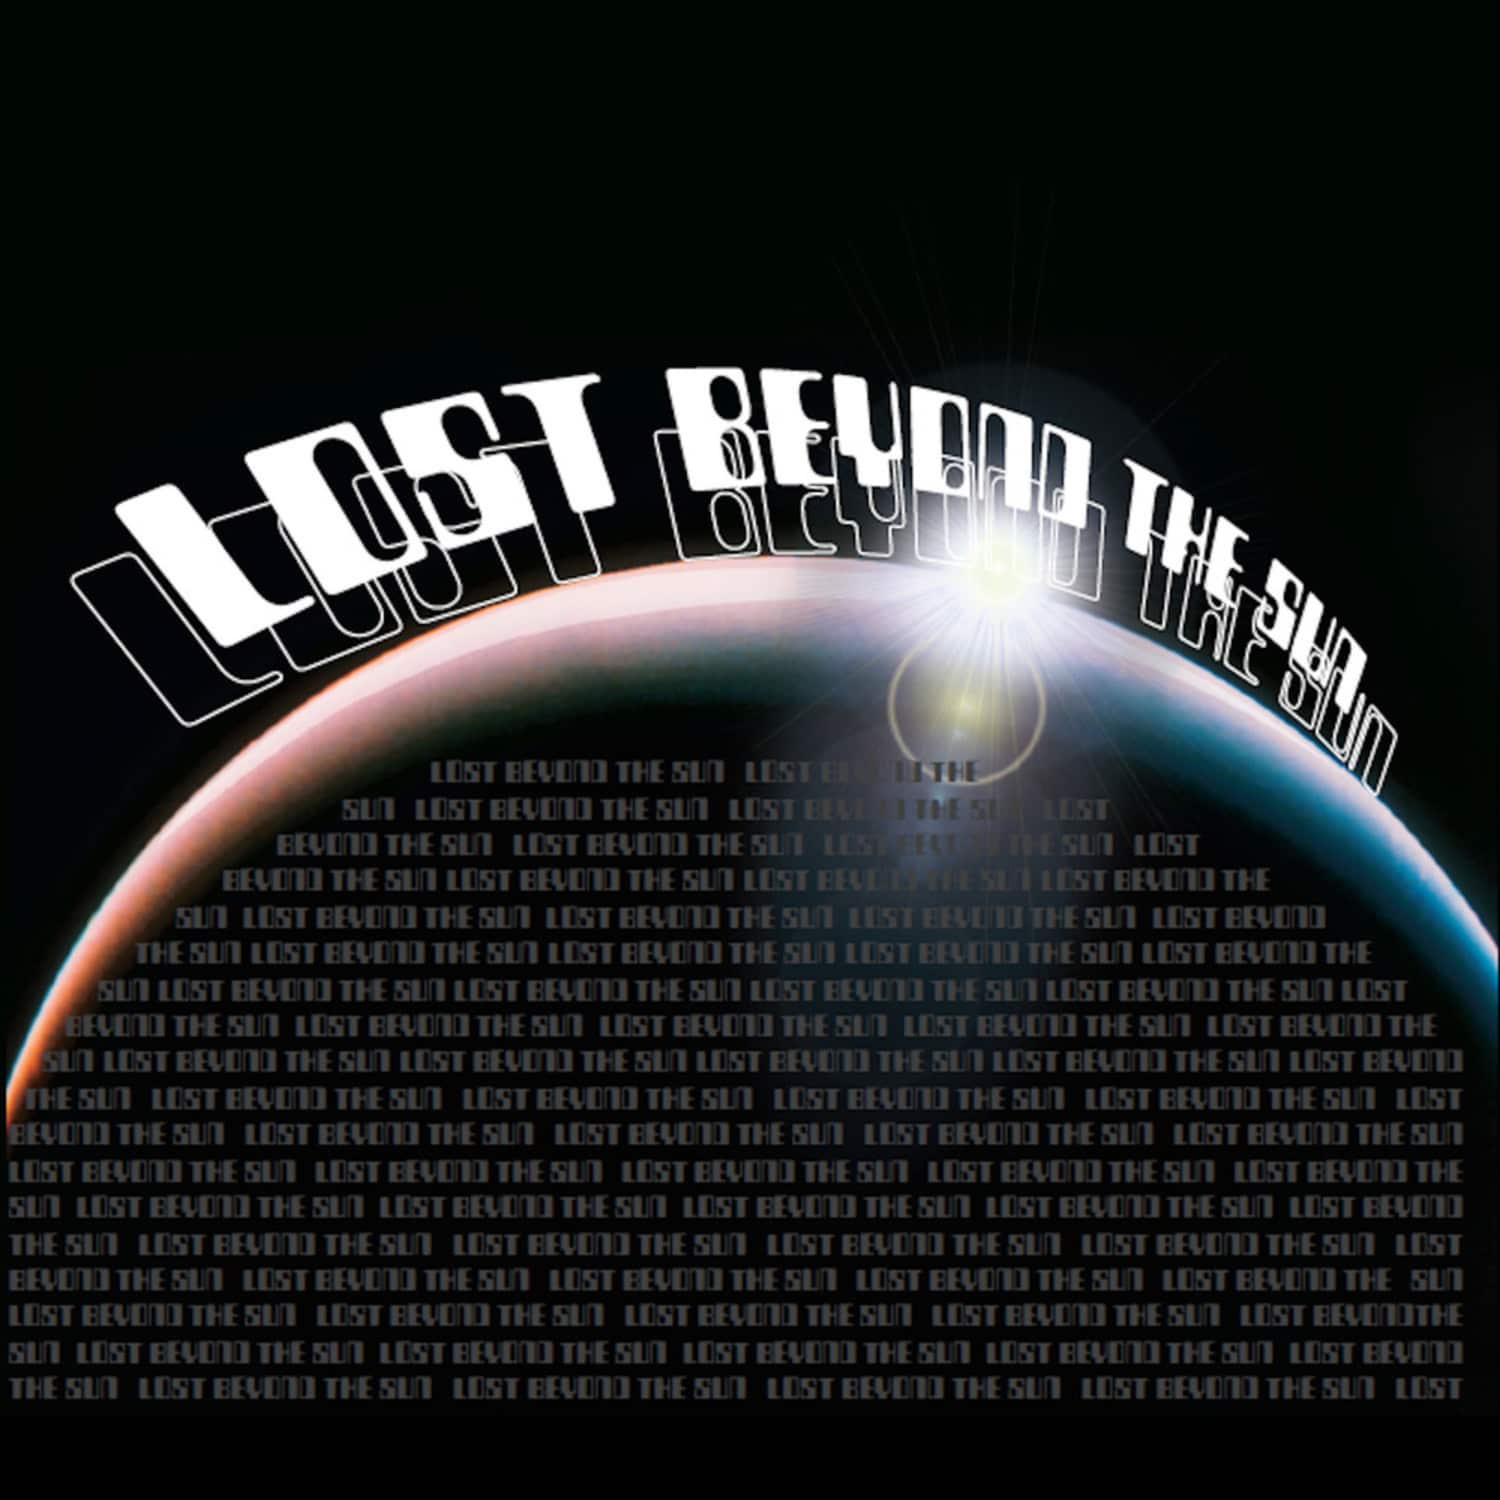 Lost Beyond The Sun - LOST BEYOND THE SUN